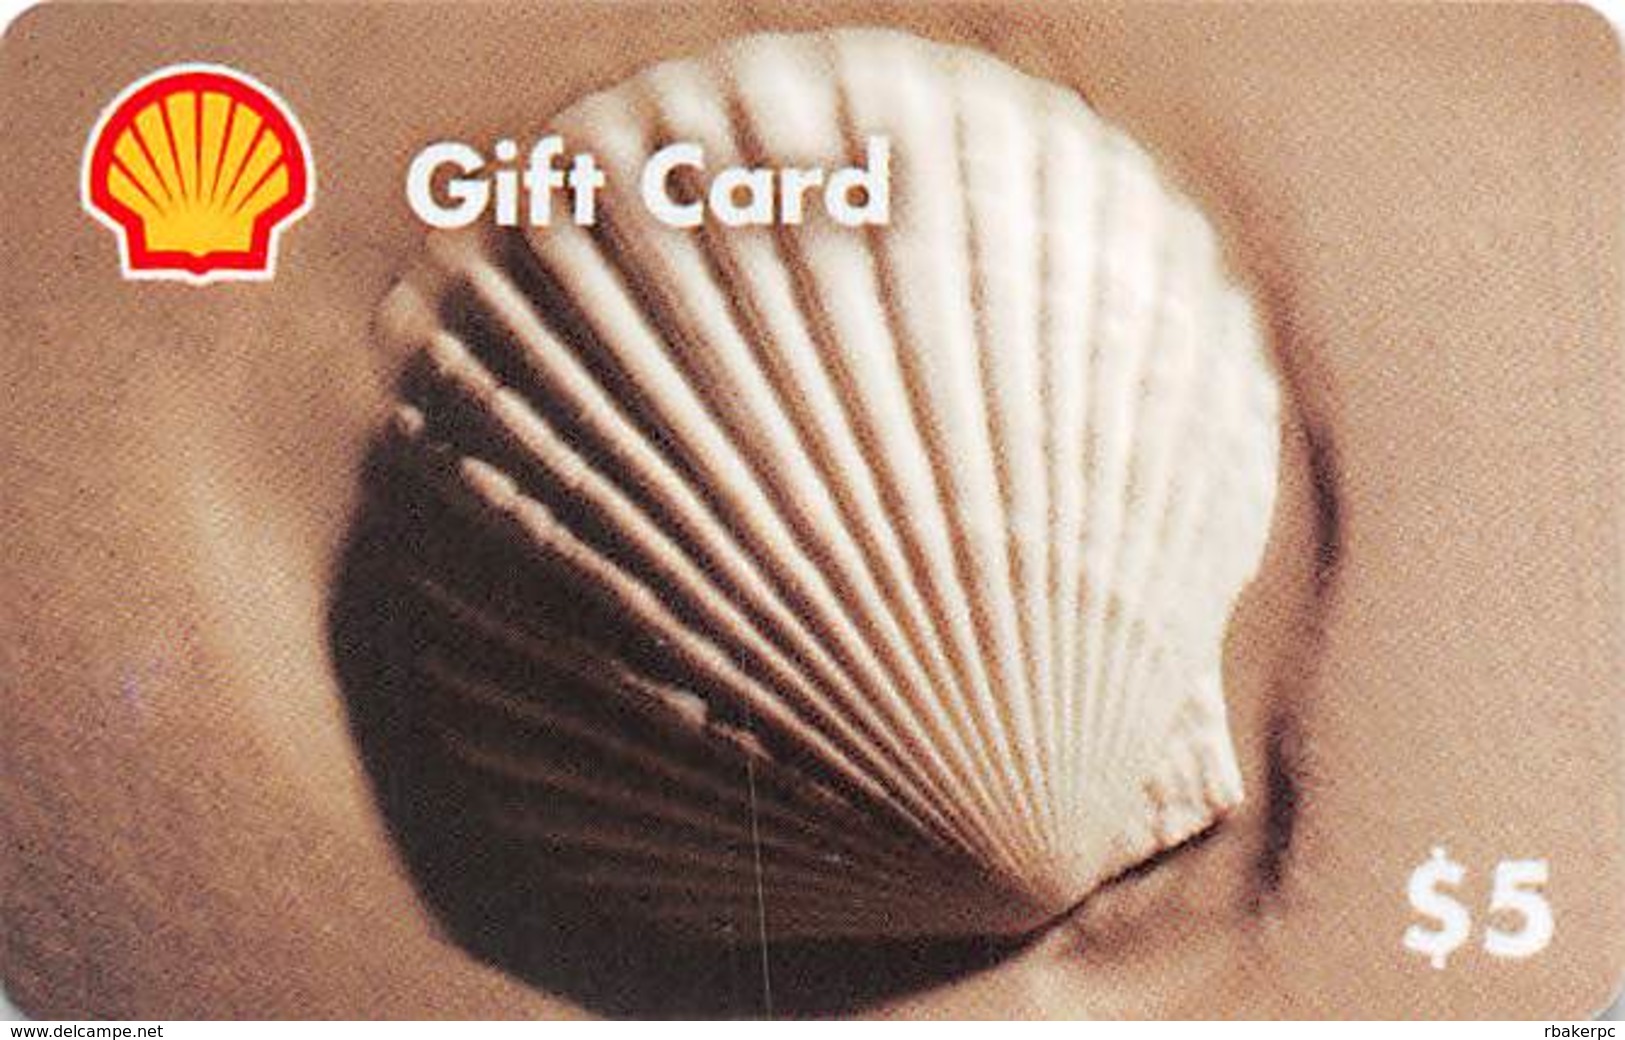 $5 Shell Gas Station Gift Card - Gift Cards